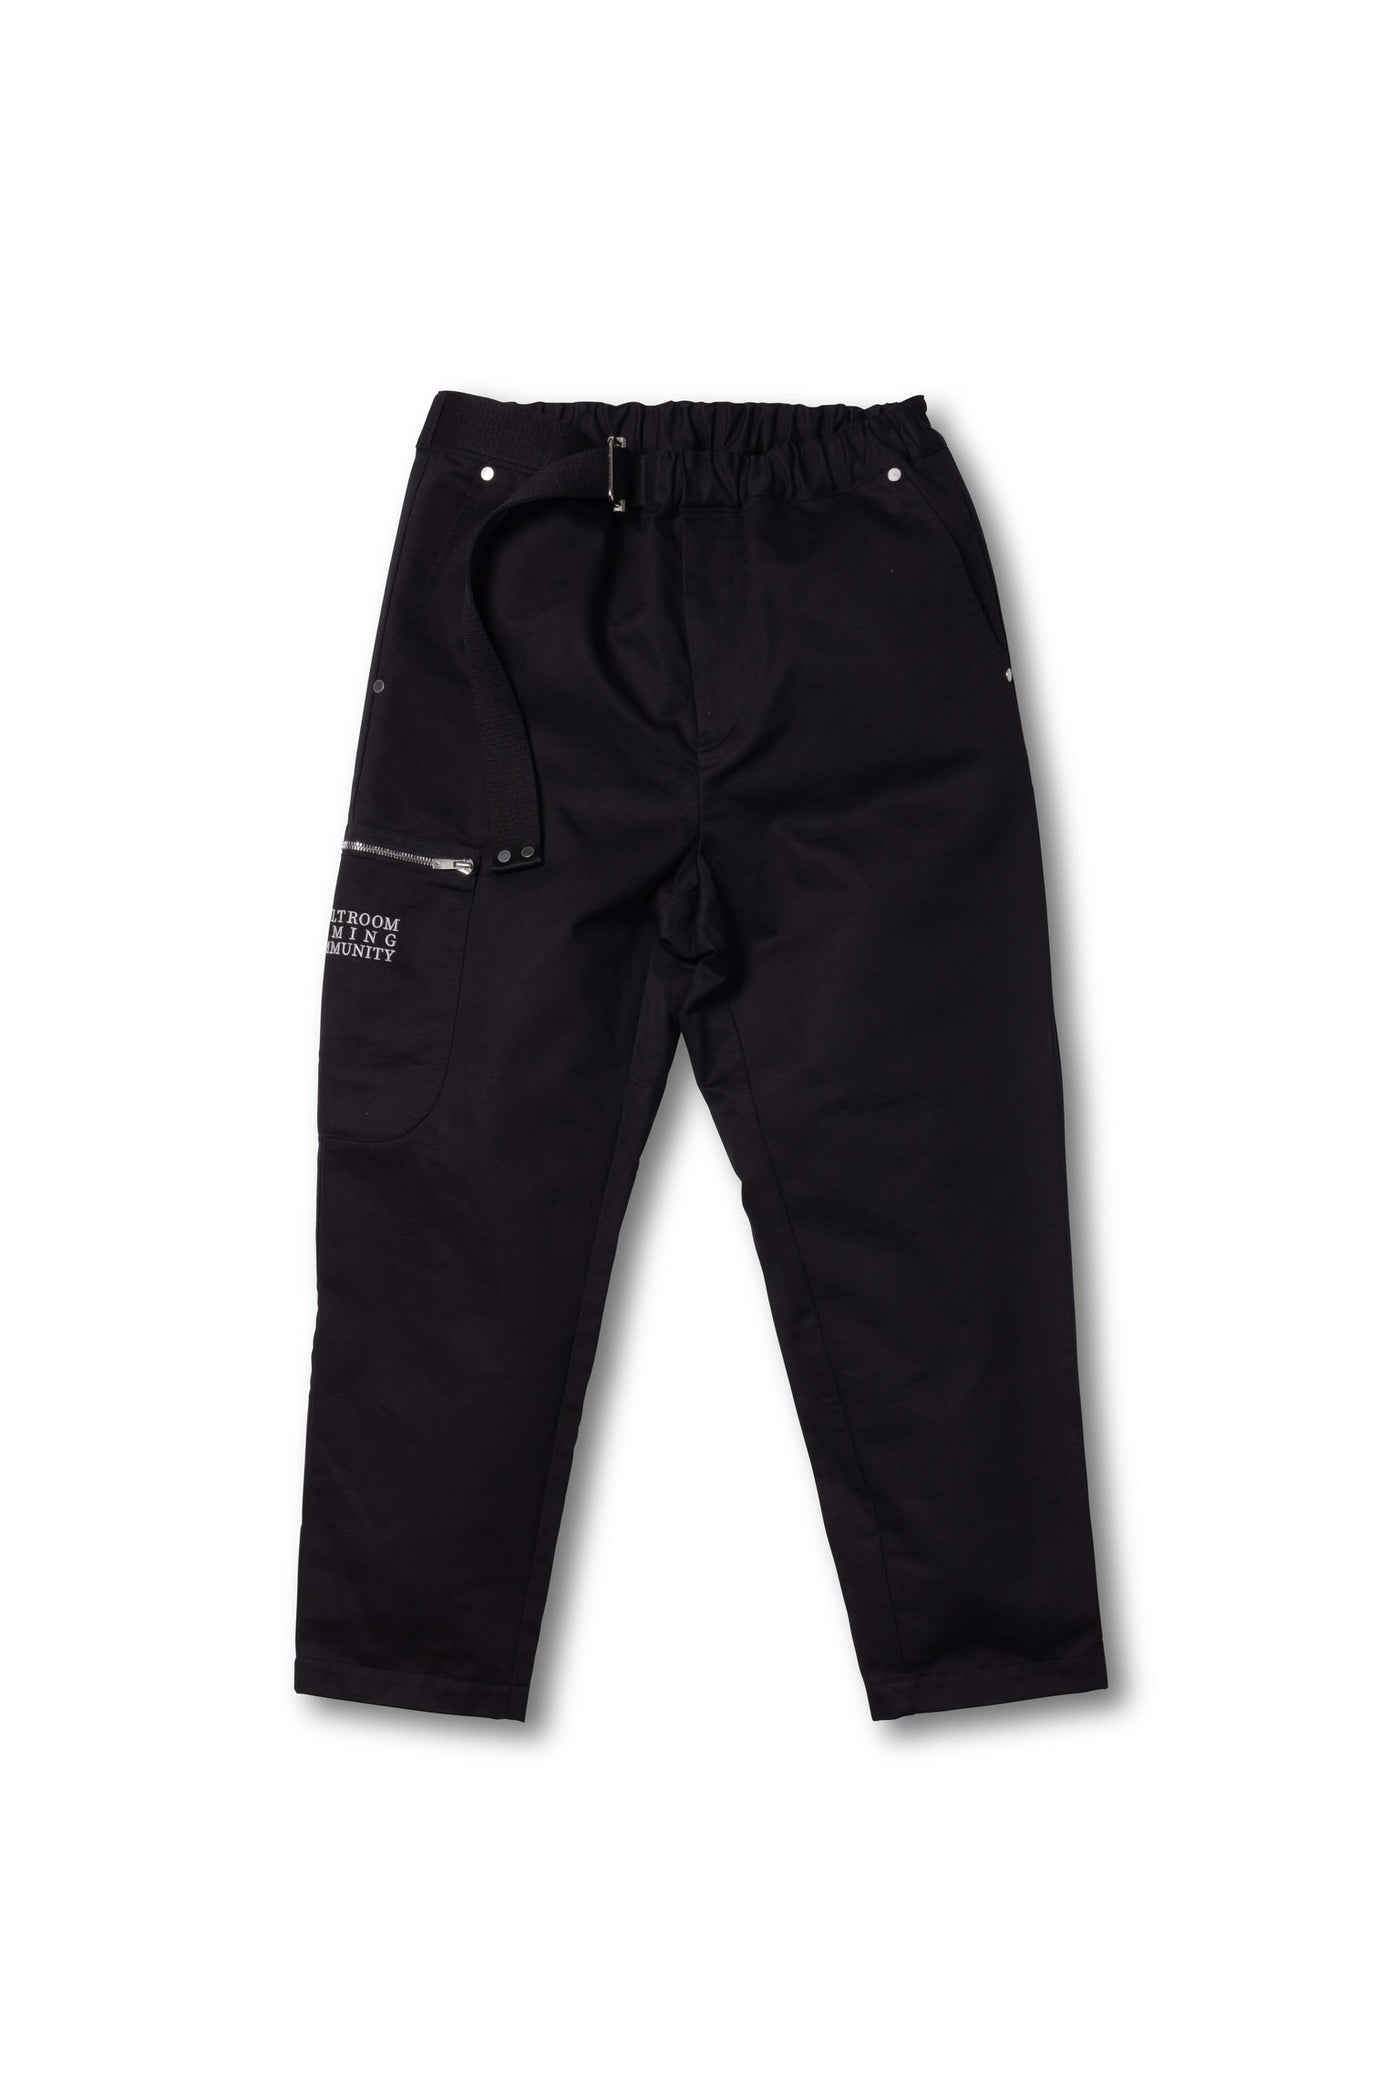 vaultroom VGC CROPPED TROUSERS - その他